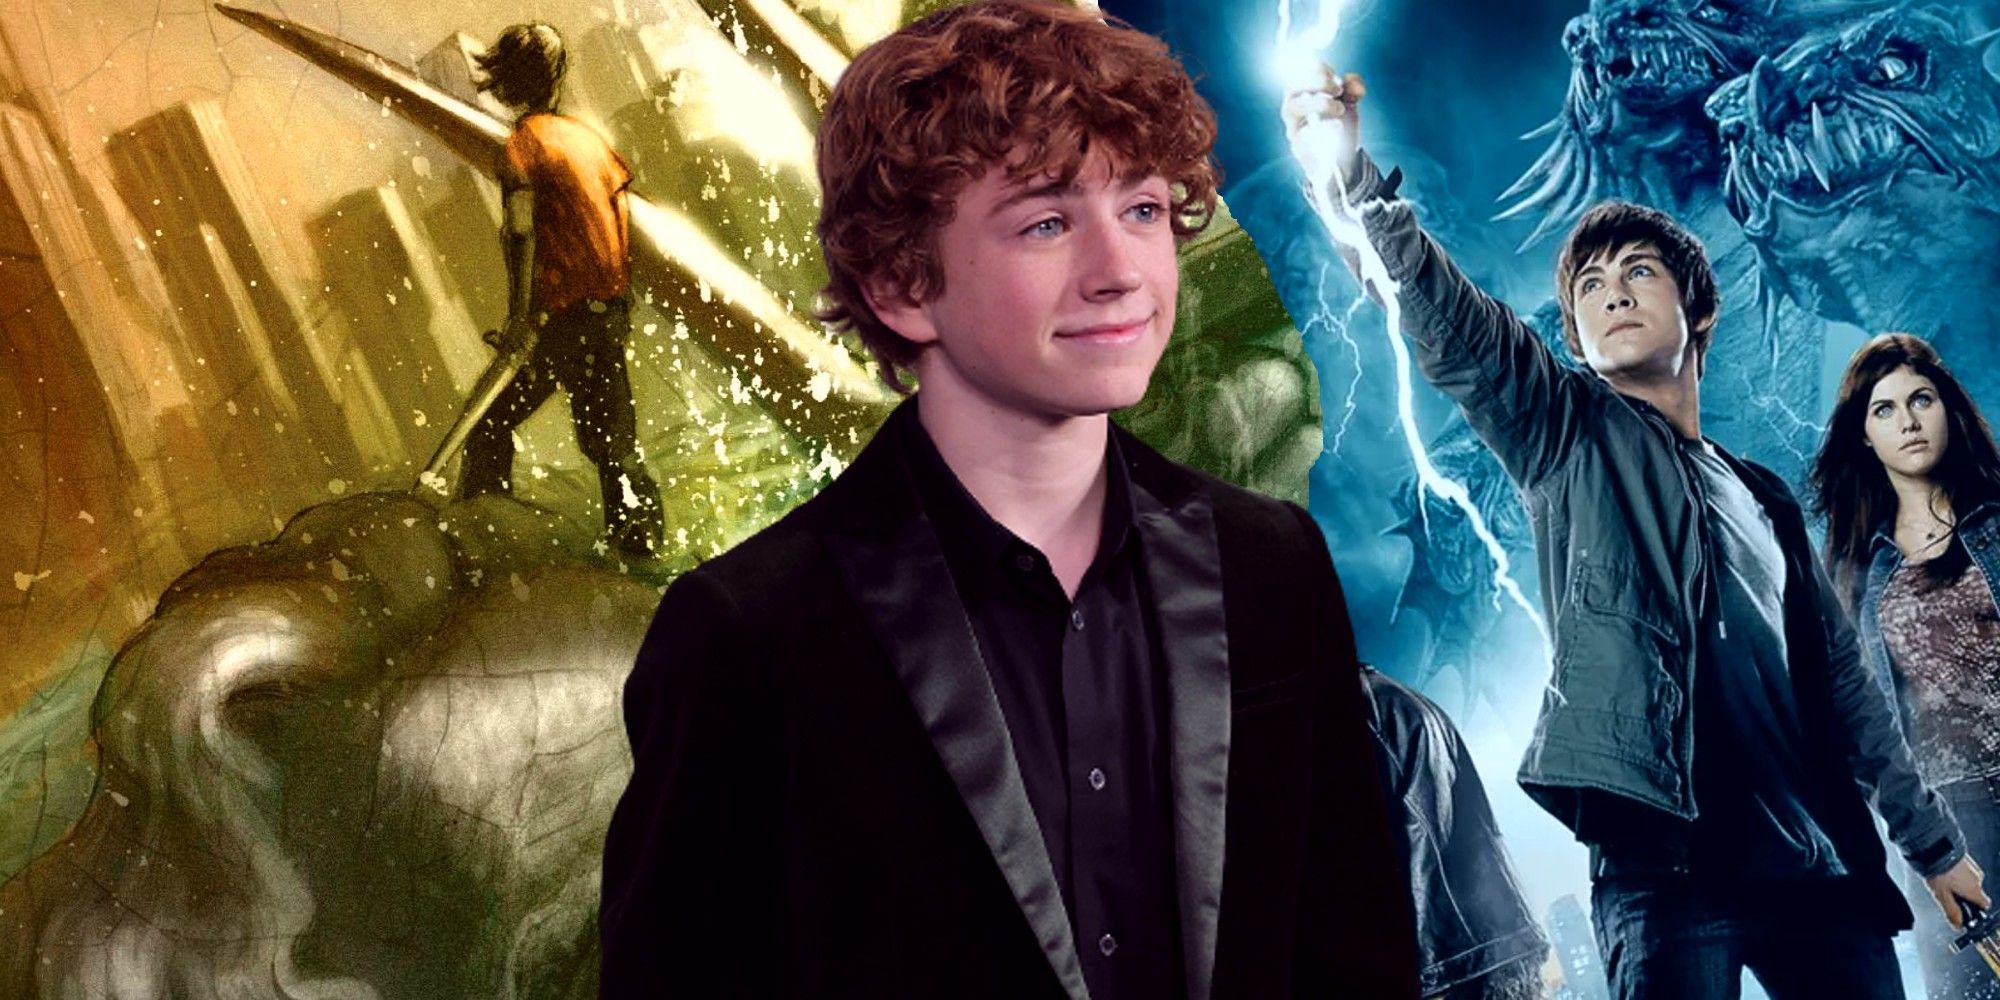 Blended image of the Disney+ Percy Jackson (movie and book)